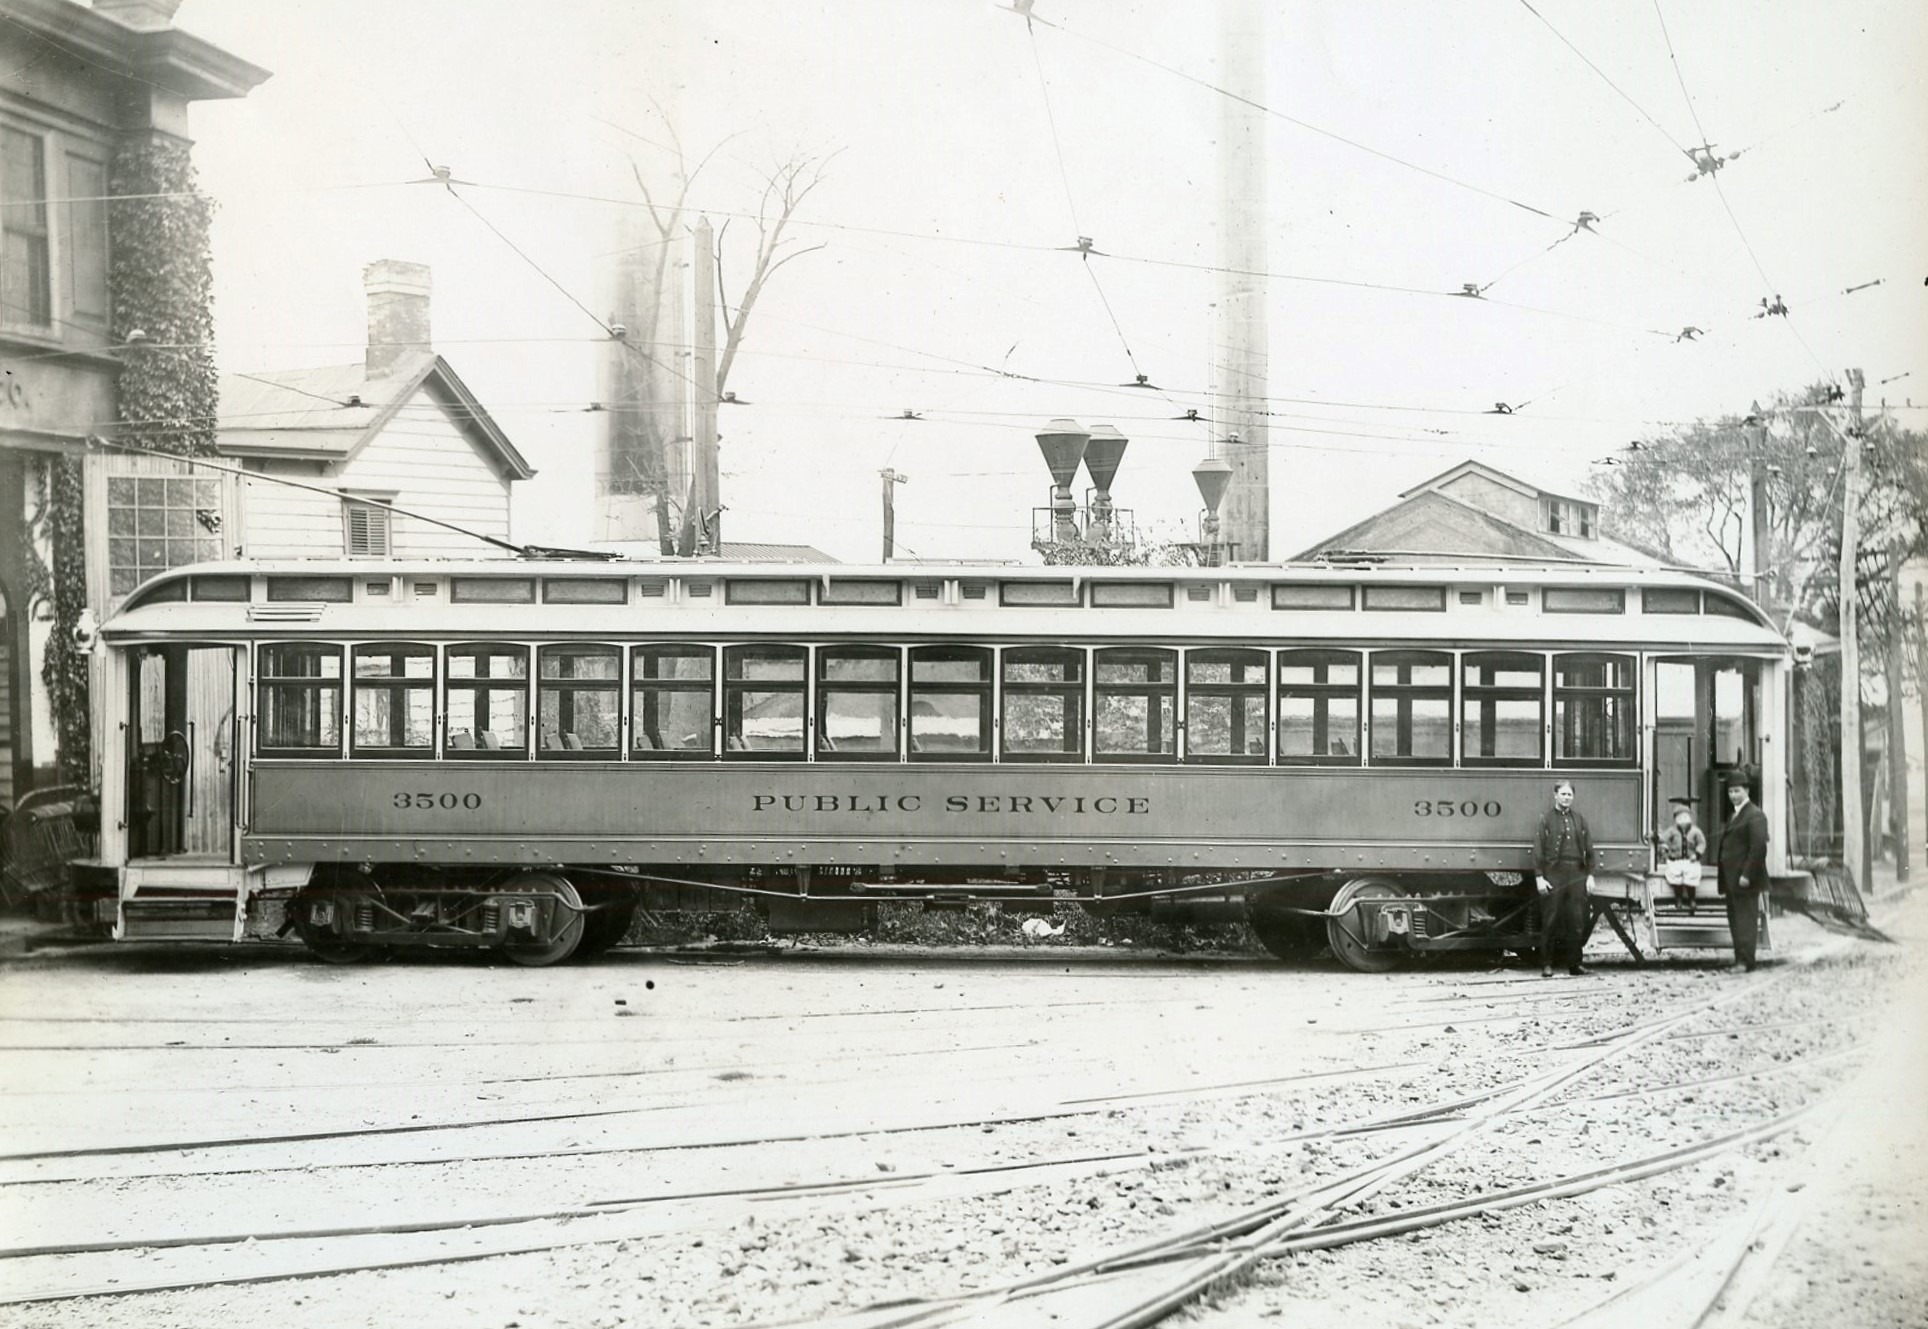 Public Service of New Jersey Co-ordinate Transport | Edgewater, New Jersey | Car #3500 | December 15, 1930 | North Jersey Chapter, NRHS Collection